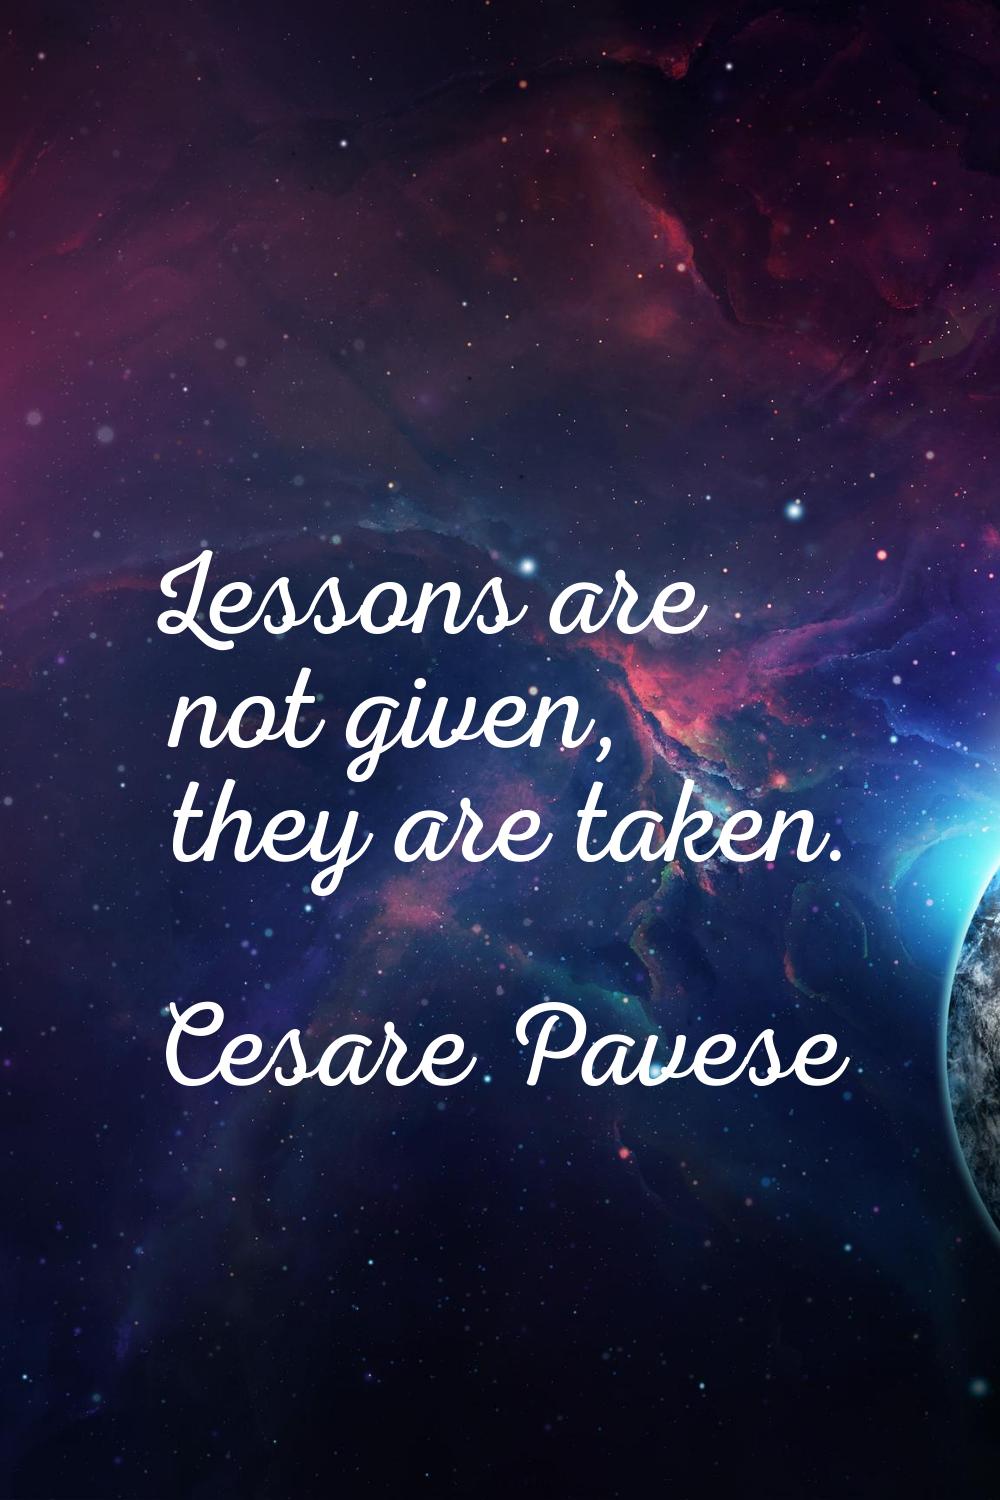 Lessons are not given, they are taken.